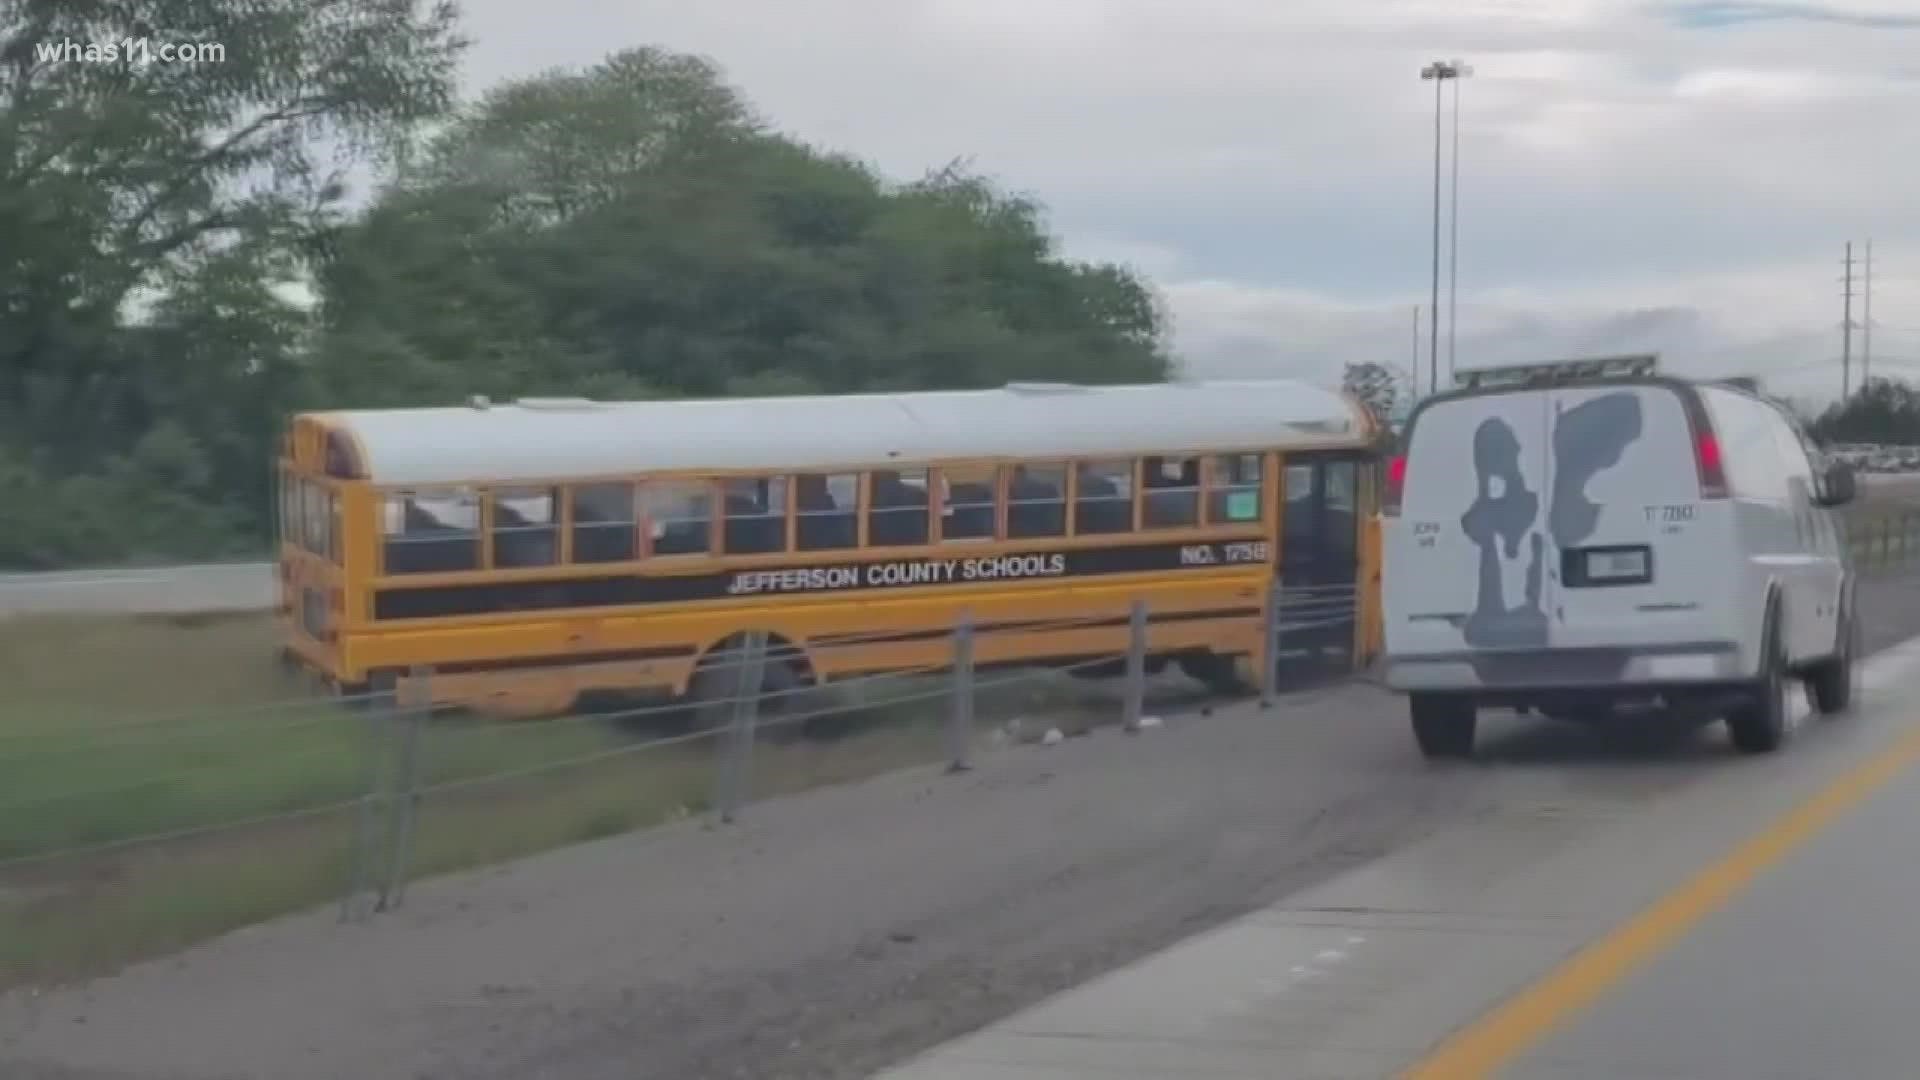 According to a Louisville Metro Police Department spokesperson, the bus had four students from Brandeis Elementary on board. No injuries were reported.